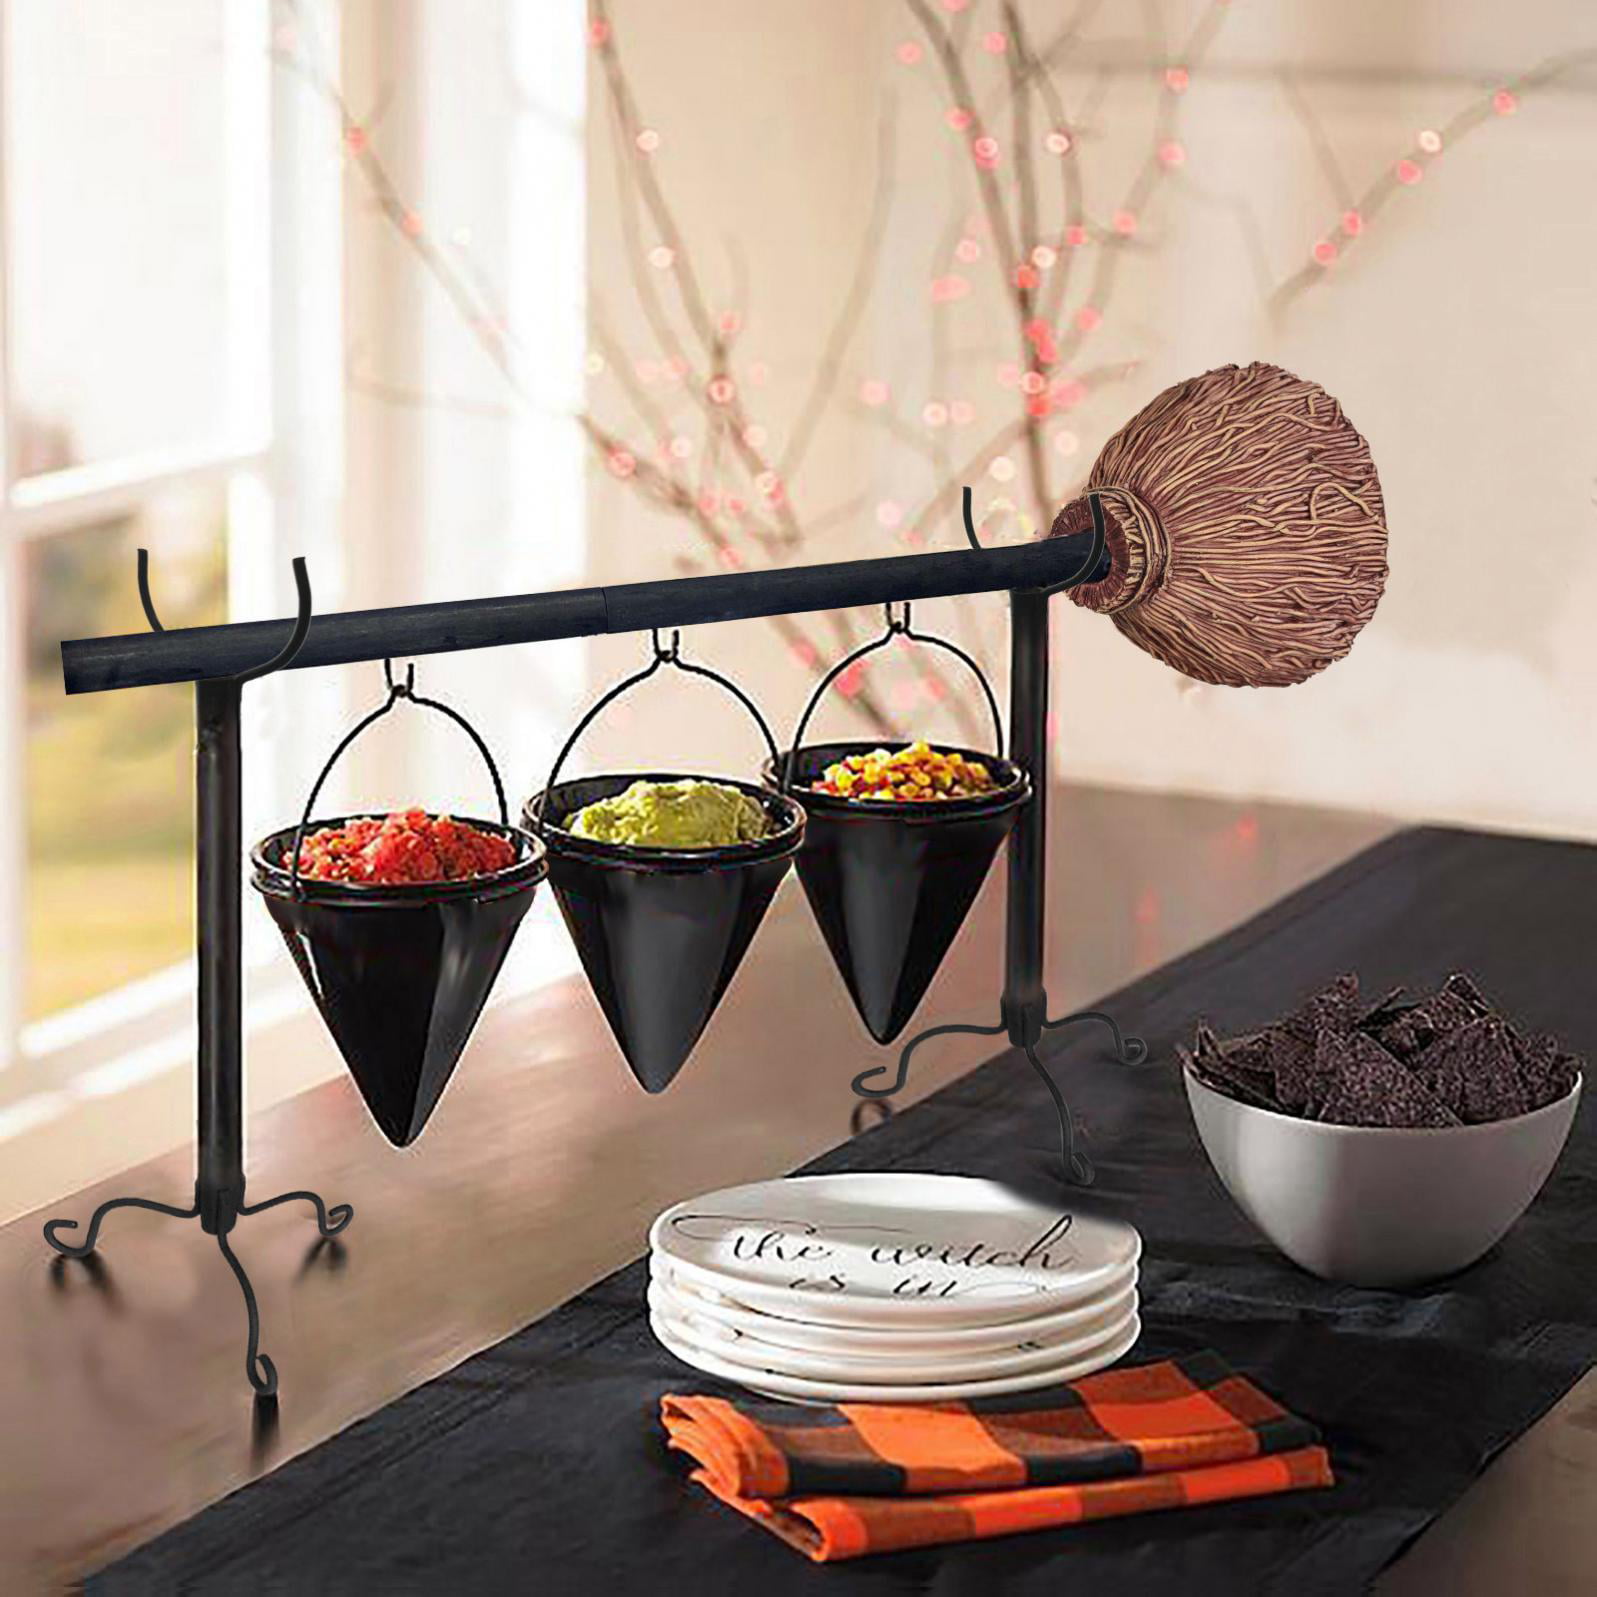 Dessert Salad Candy Bowl Halloween Broomstick Snack Bowl Stand with Removable Basket Organizer Witch Broom Fruit Baskets Holder Party Bowl Creative Christmas Decorations Wedding Party Decor B